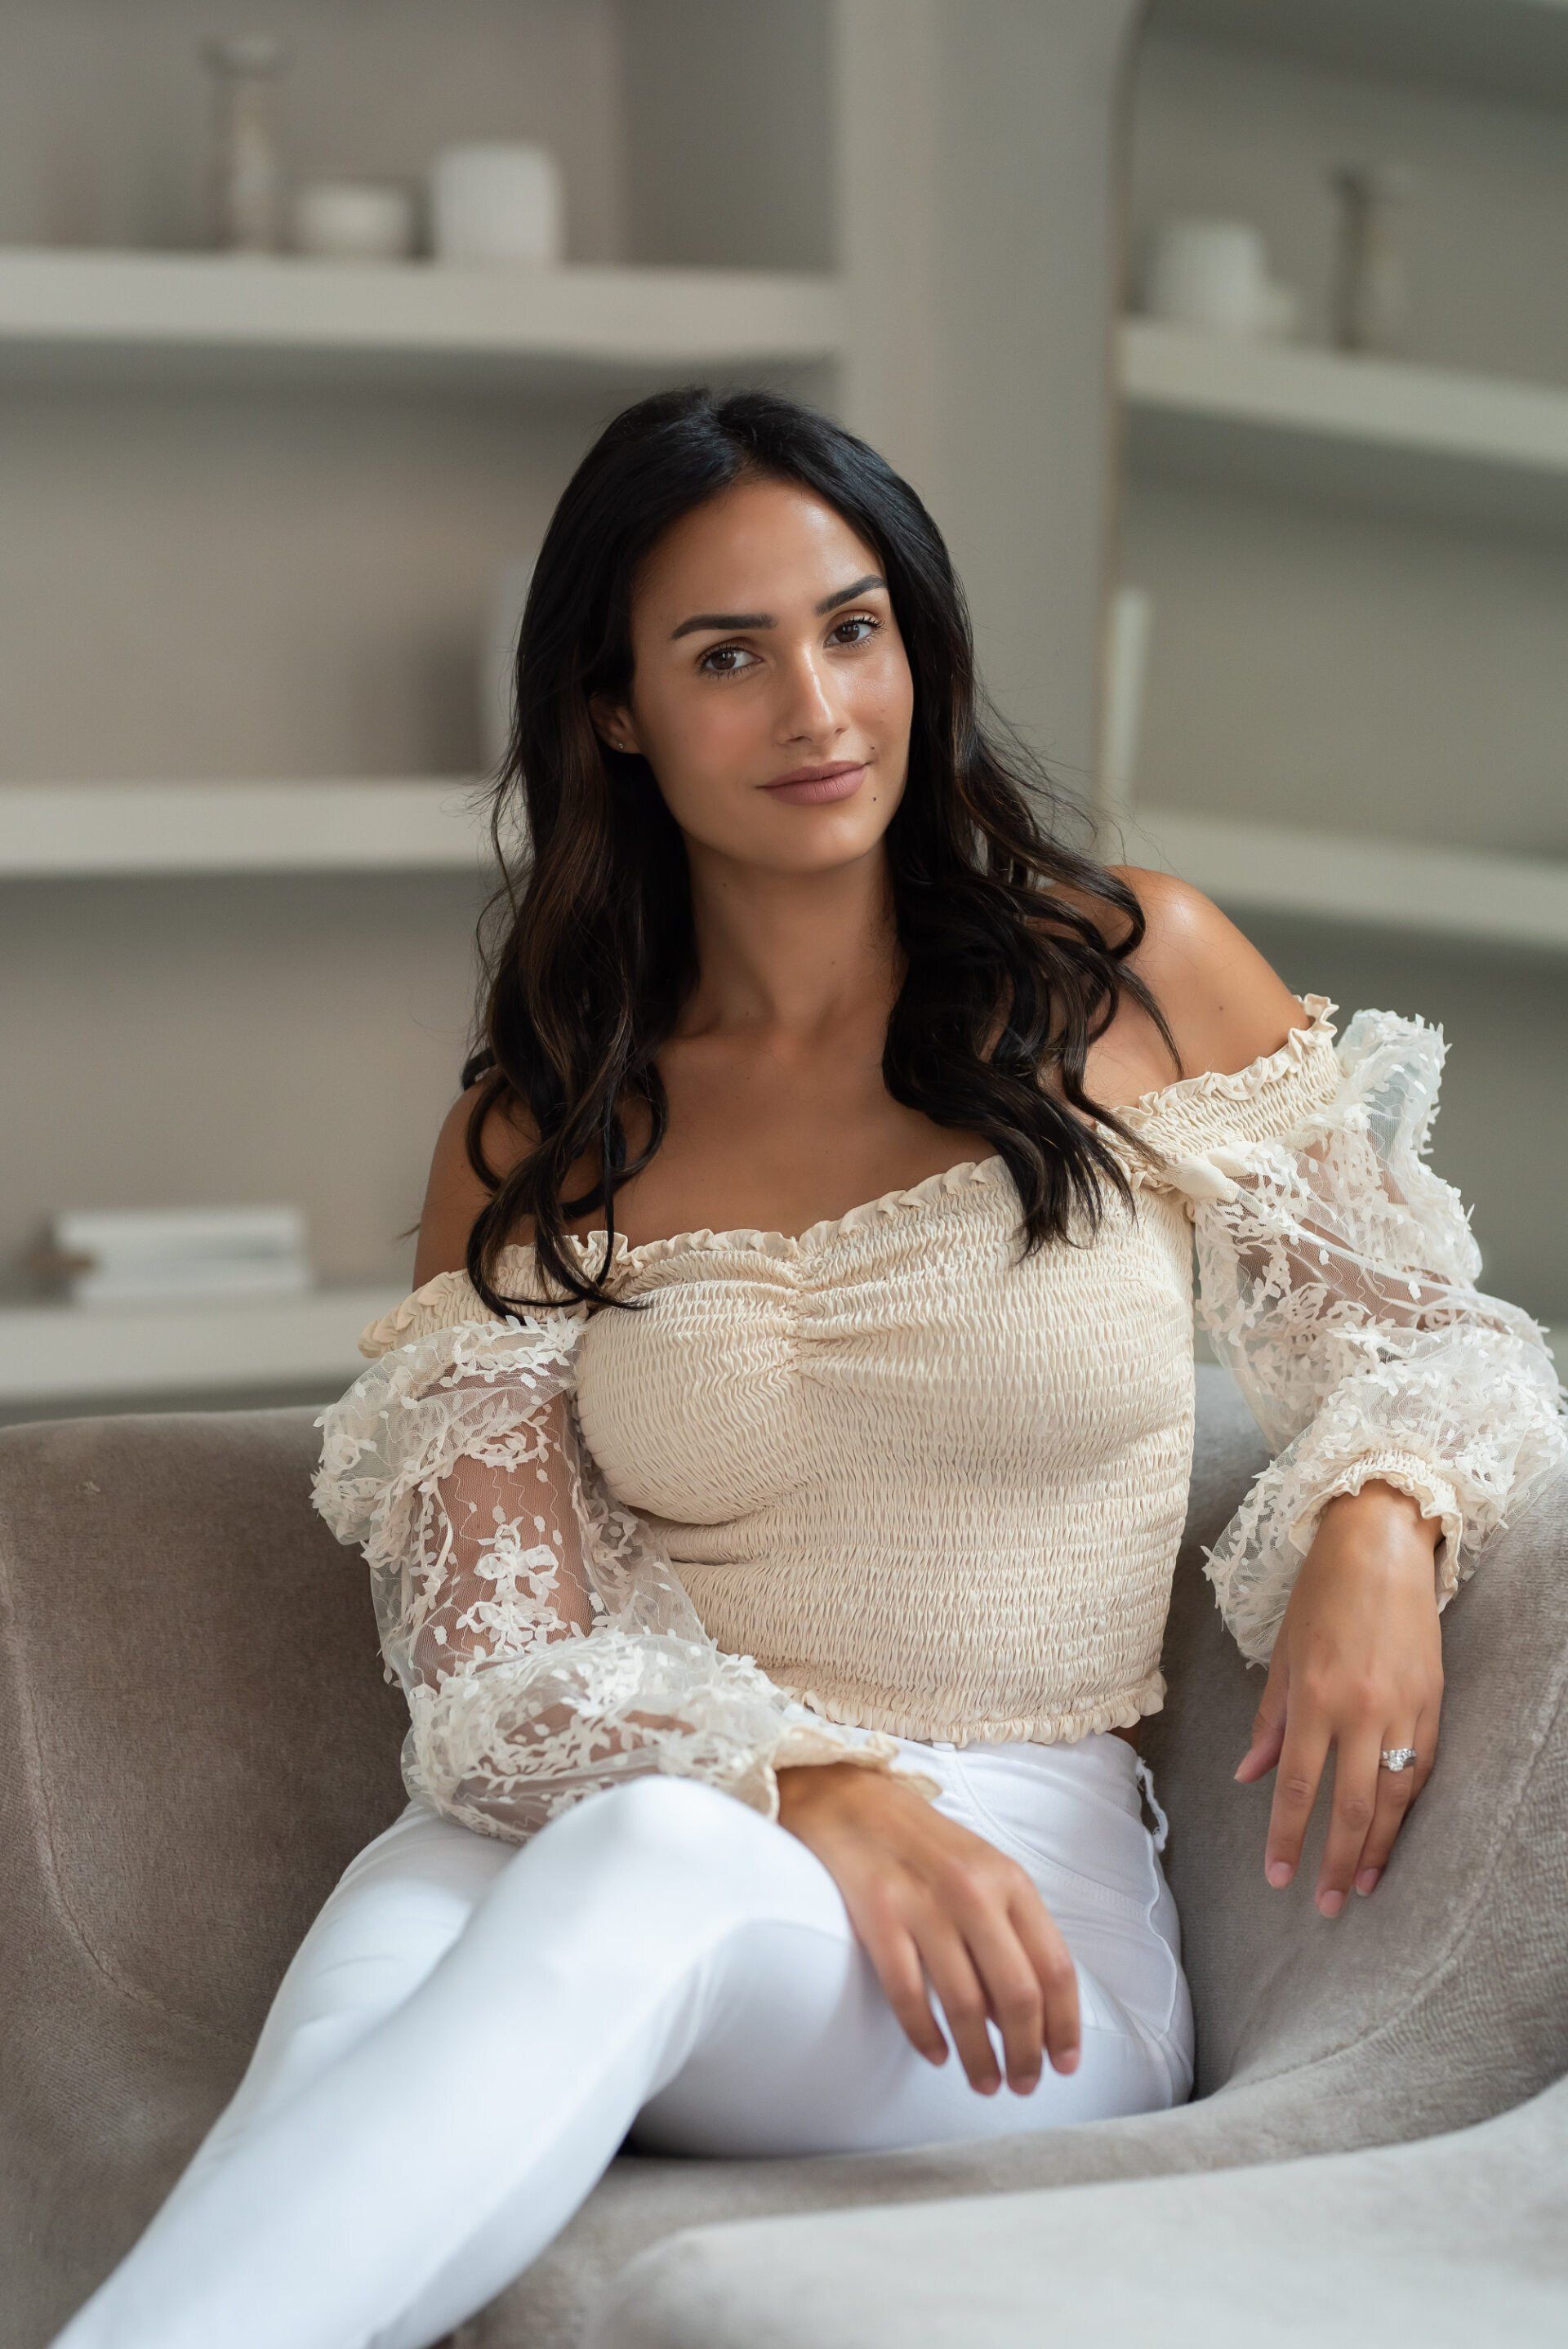 Social media influencer Chantel sitting on a suede sofa with a floral off-shoulder lace top